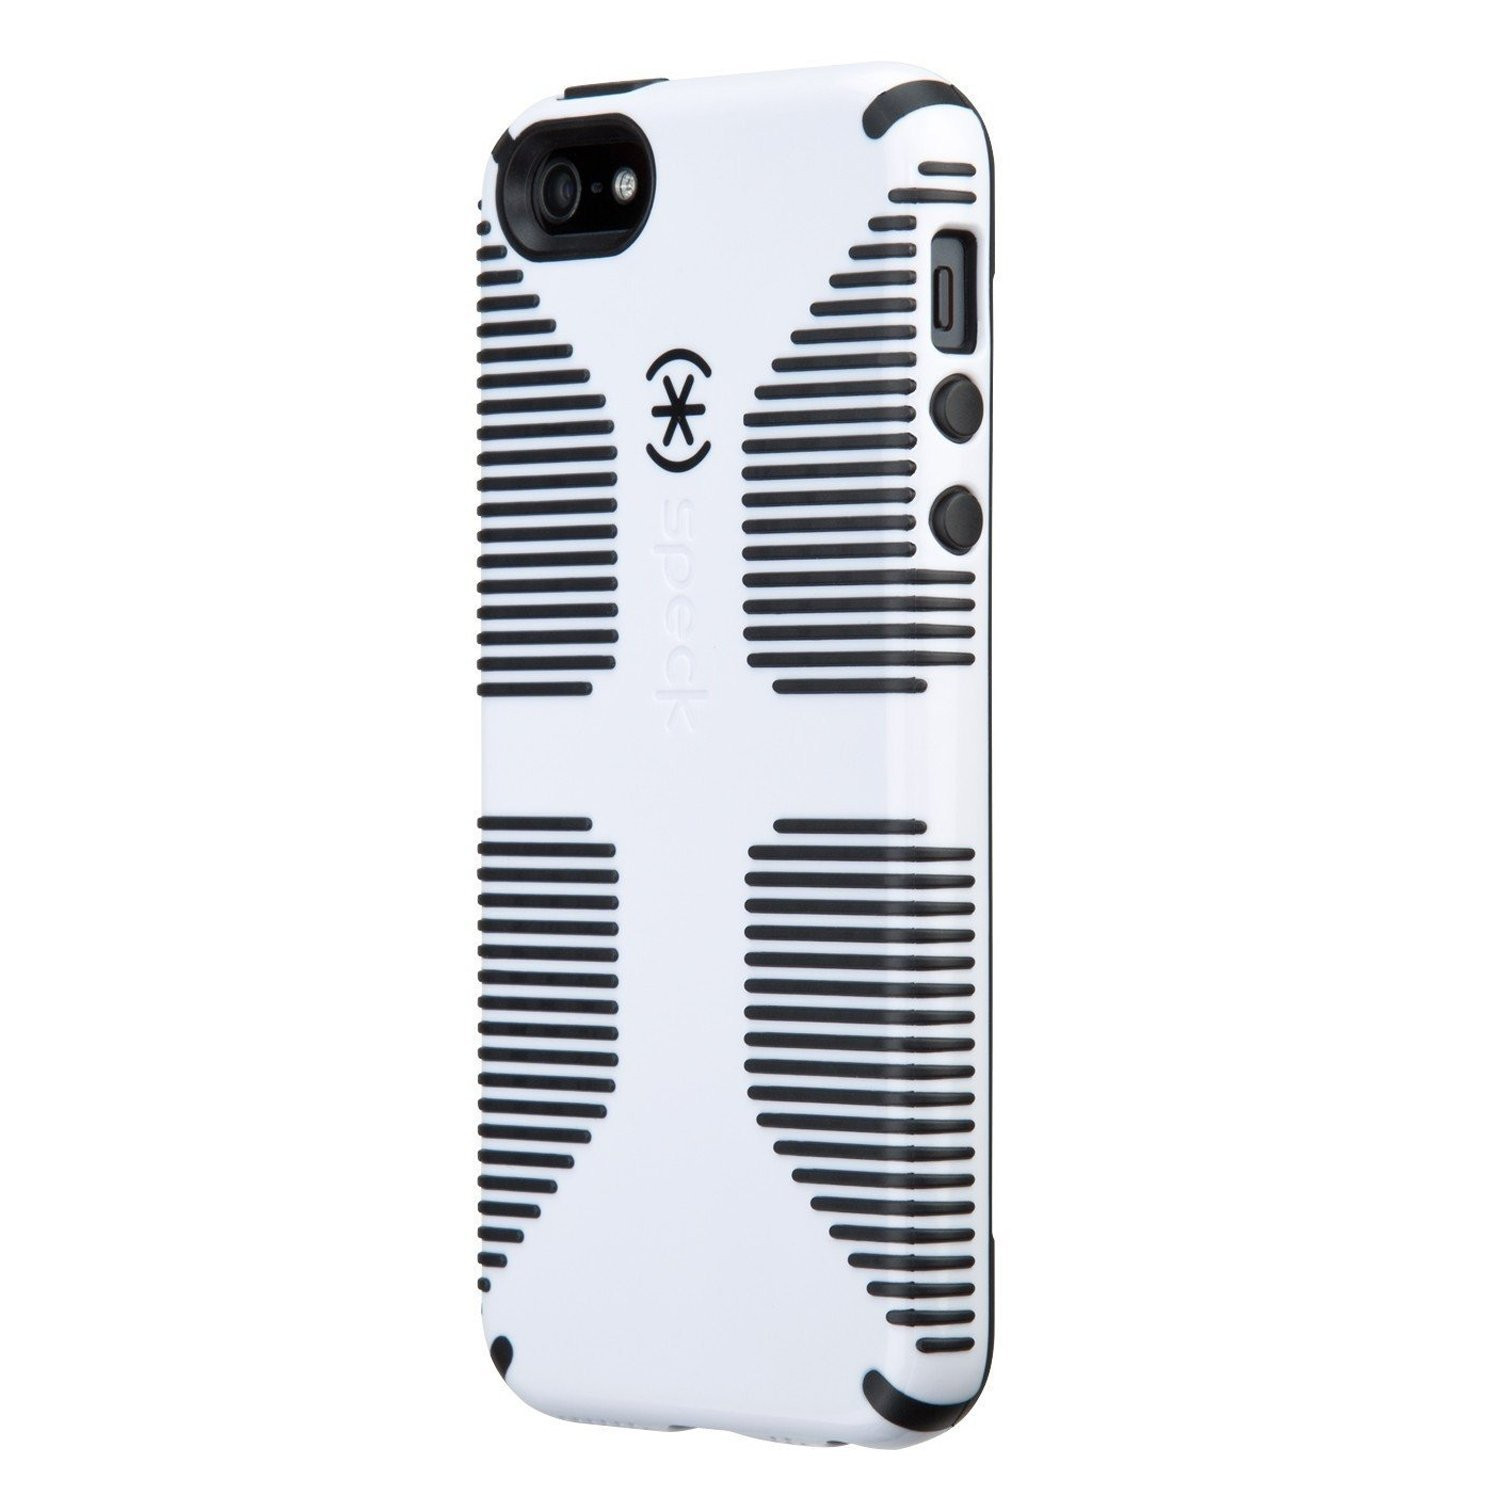 Speck Candy shell Grip Iphone 6 - White/Black